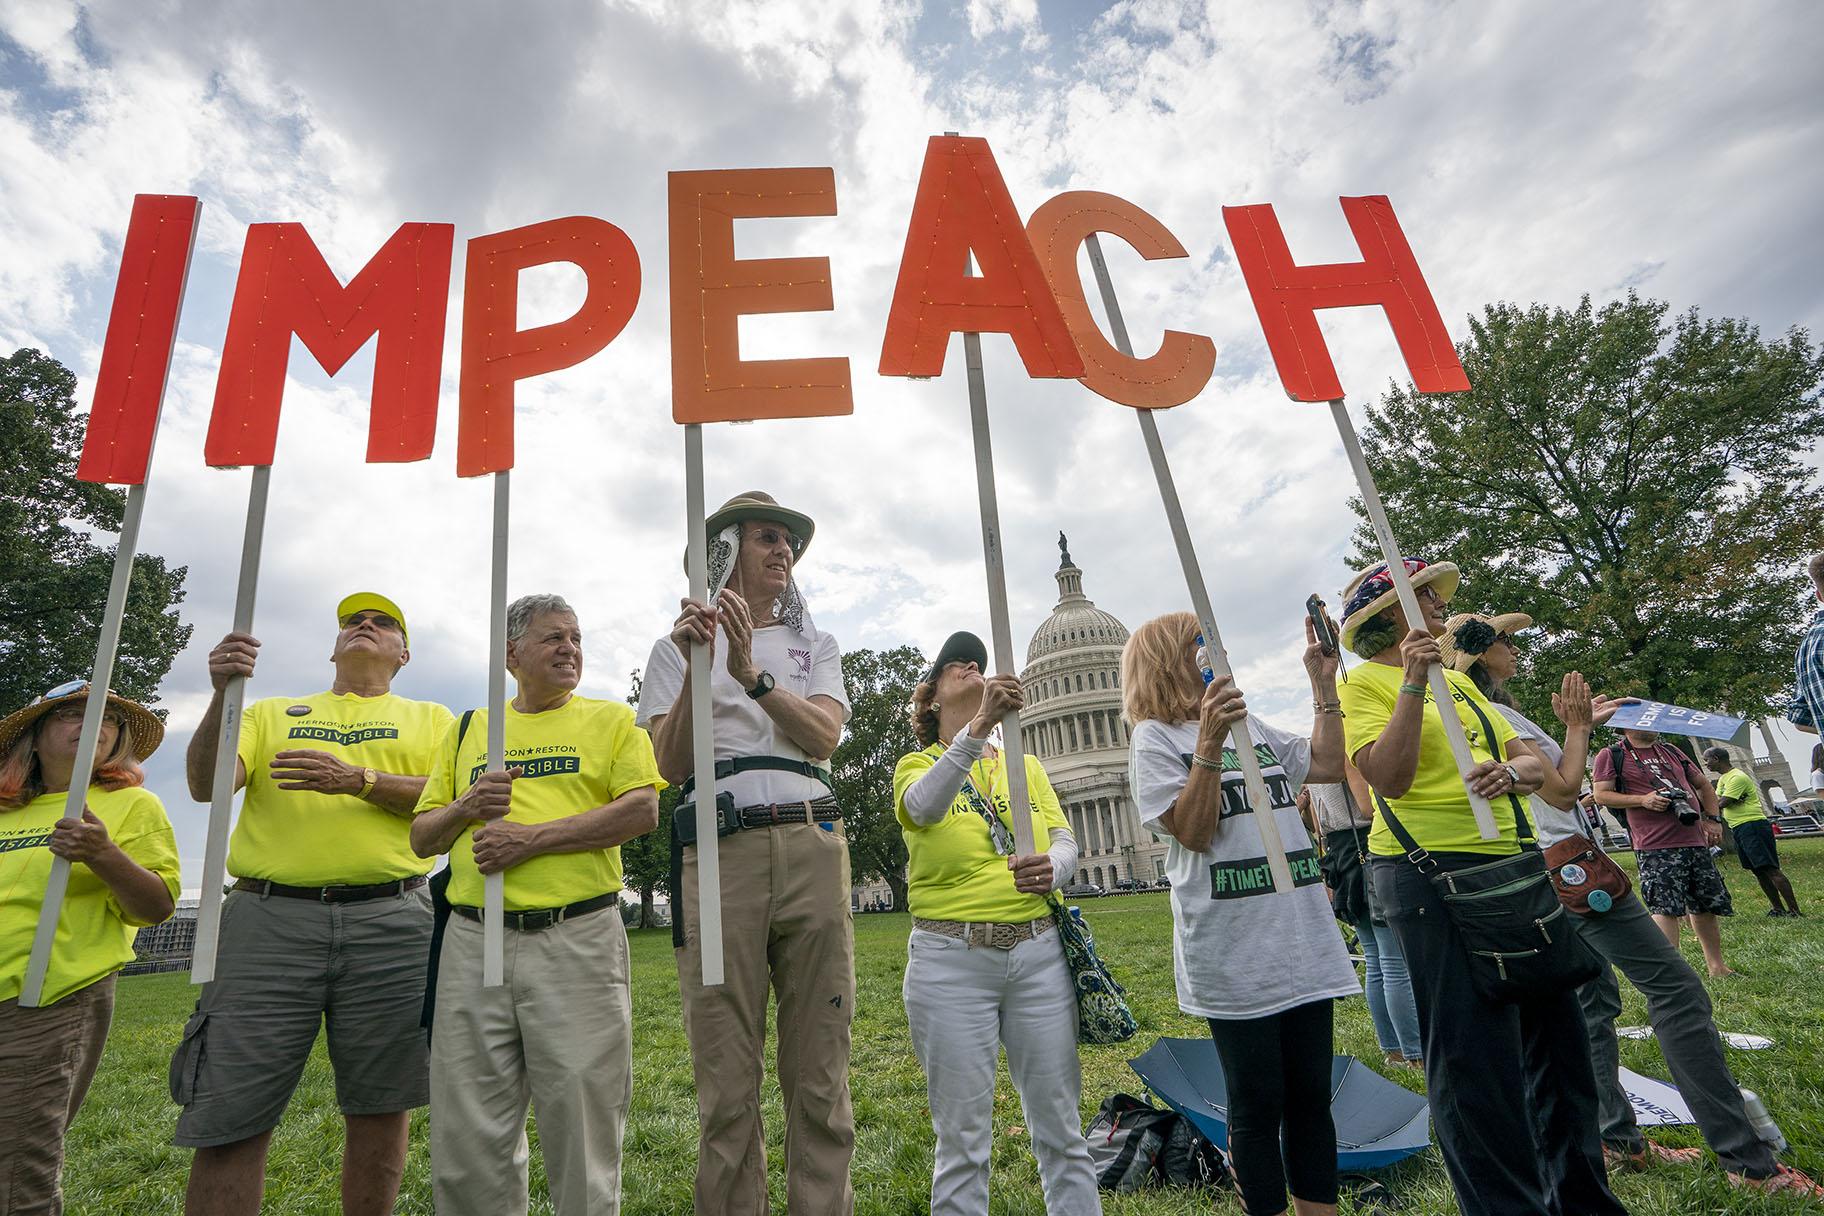 Activists rally for the impeachment of President Donald Trump at the Capitol in Washington on Thursday, Sept. 26, 2019. (AP Photo / J. Scott Applewhite)